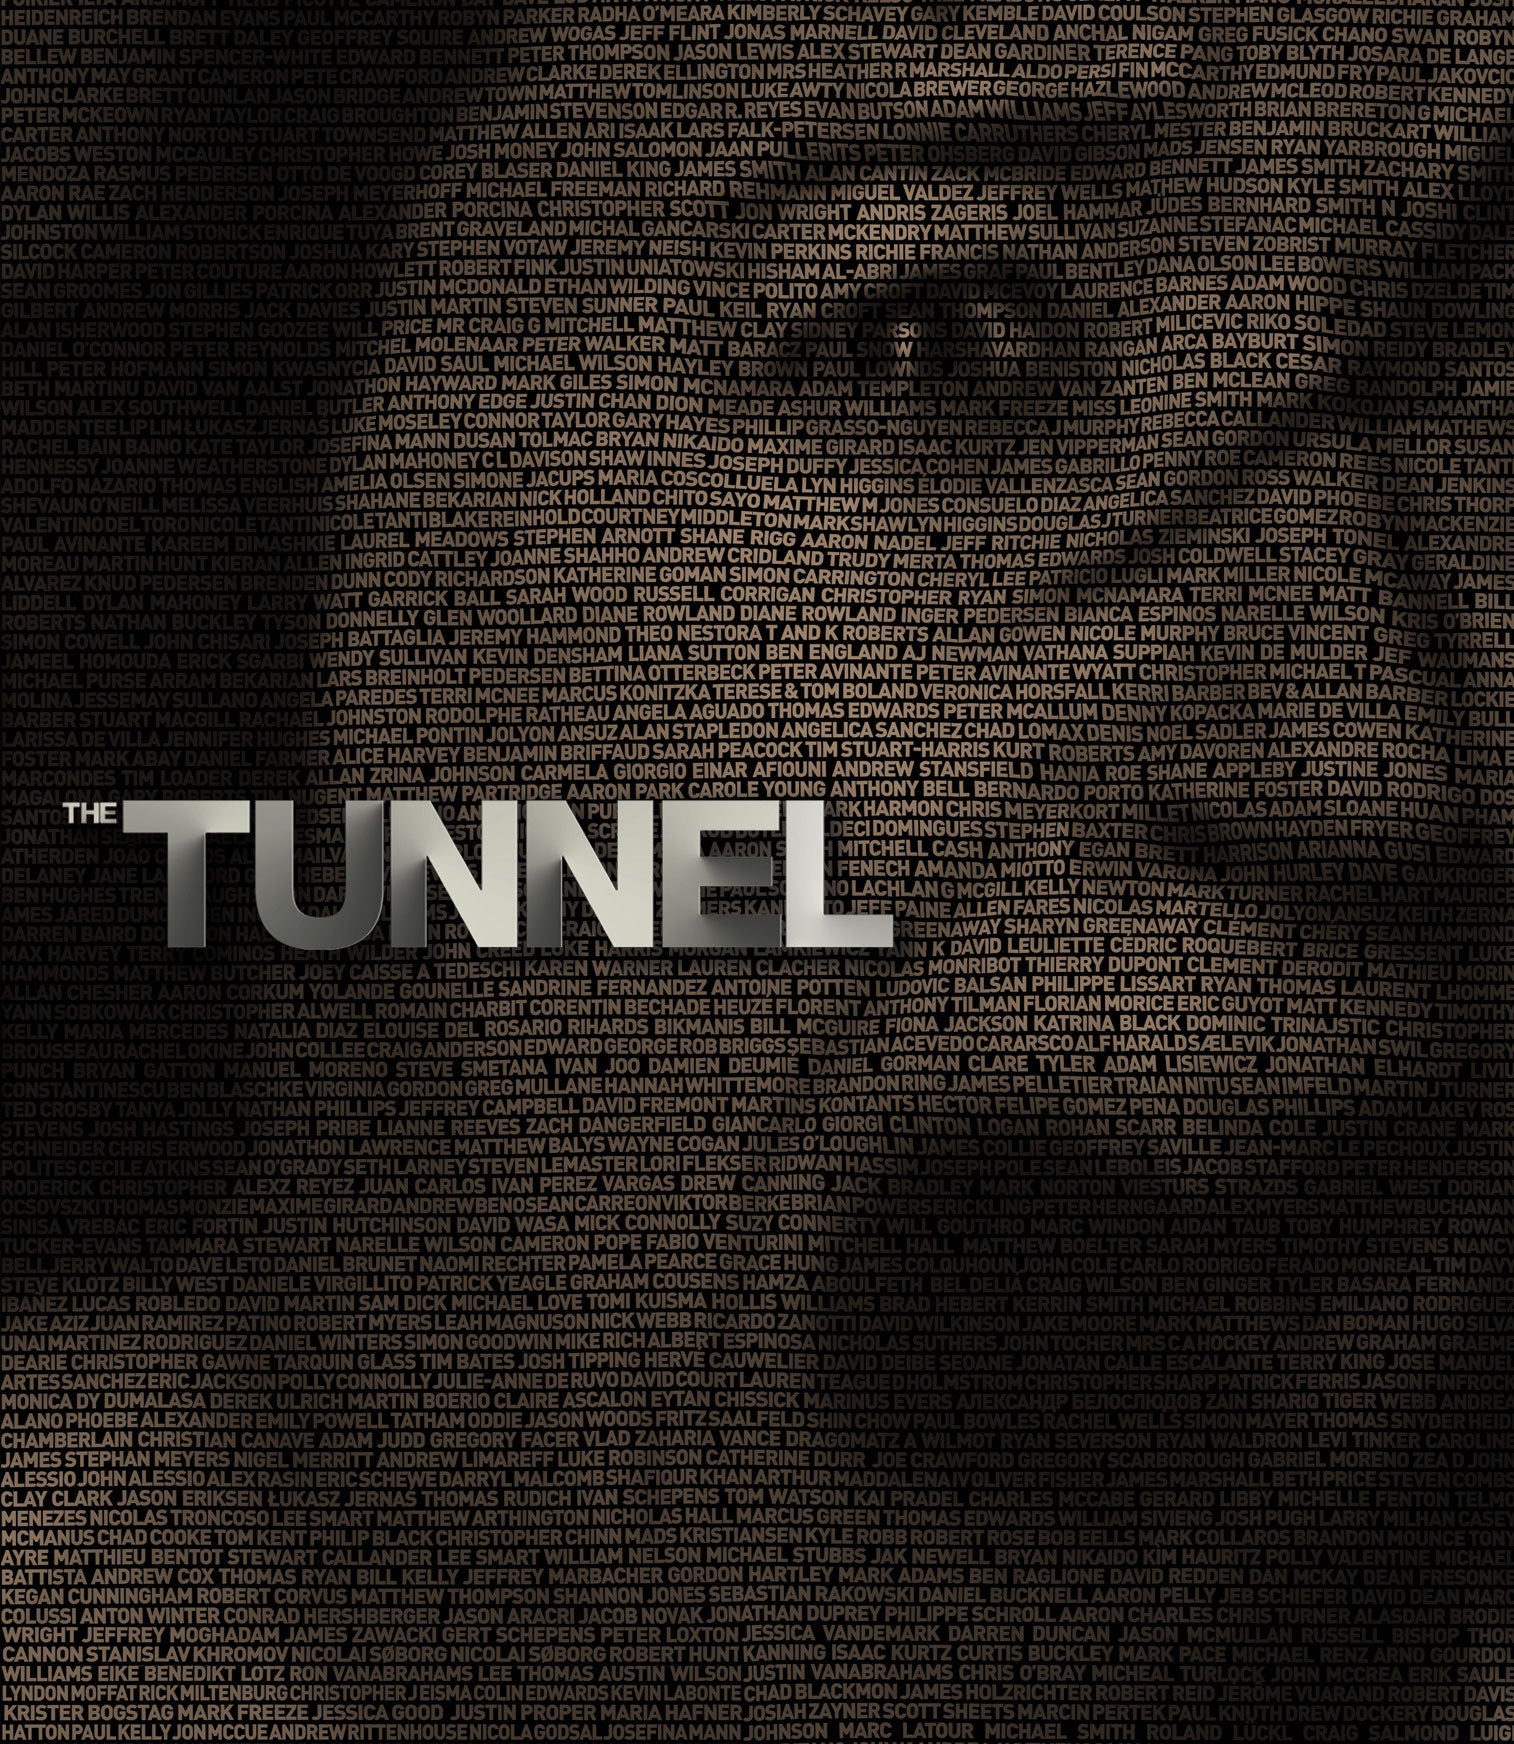 THE TUNNEL (LIMITED EDITION) BLU-RAY [PRE-ORDER]